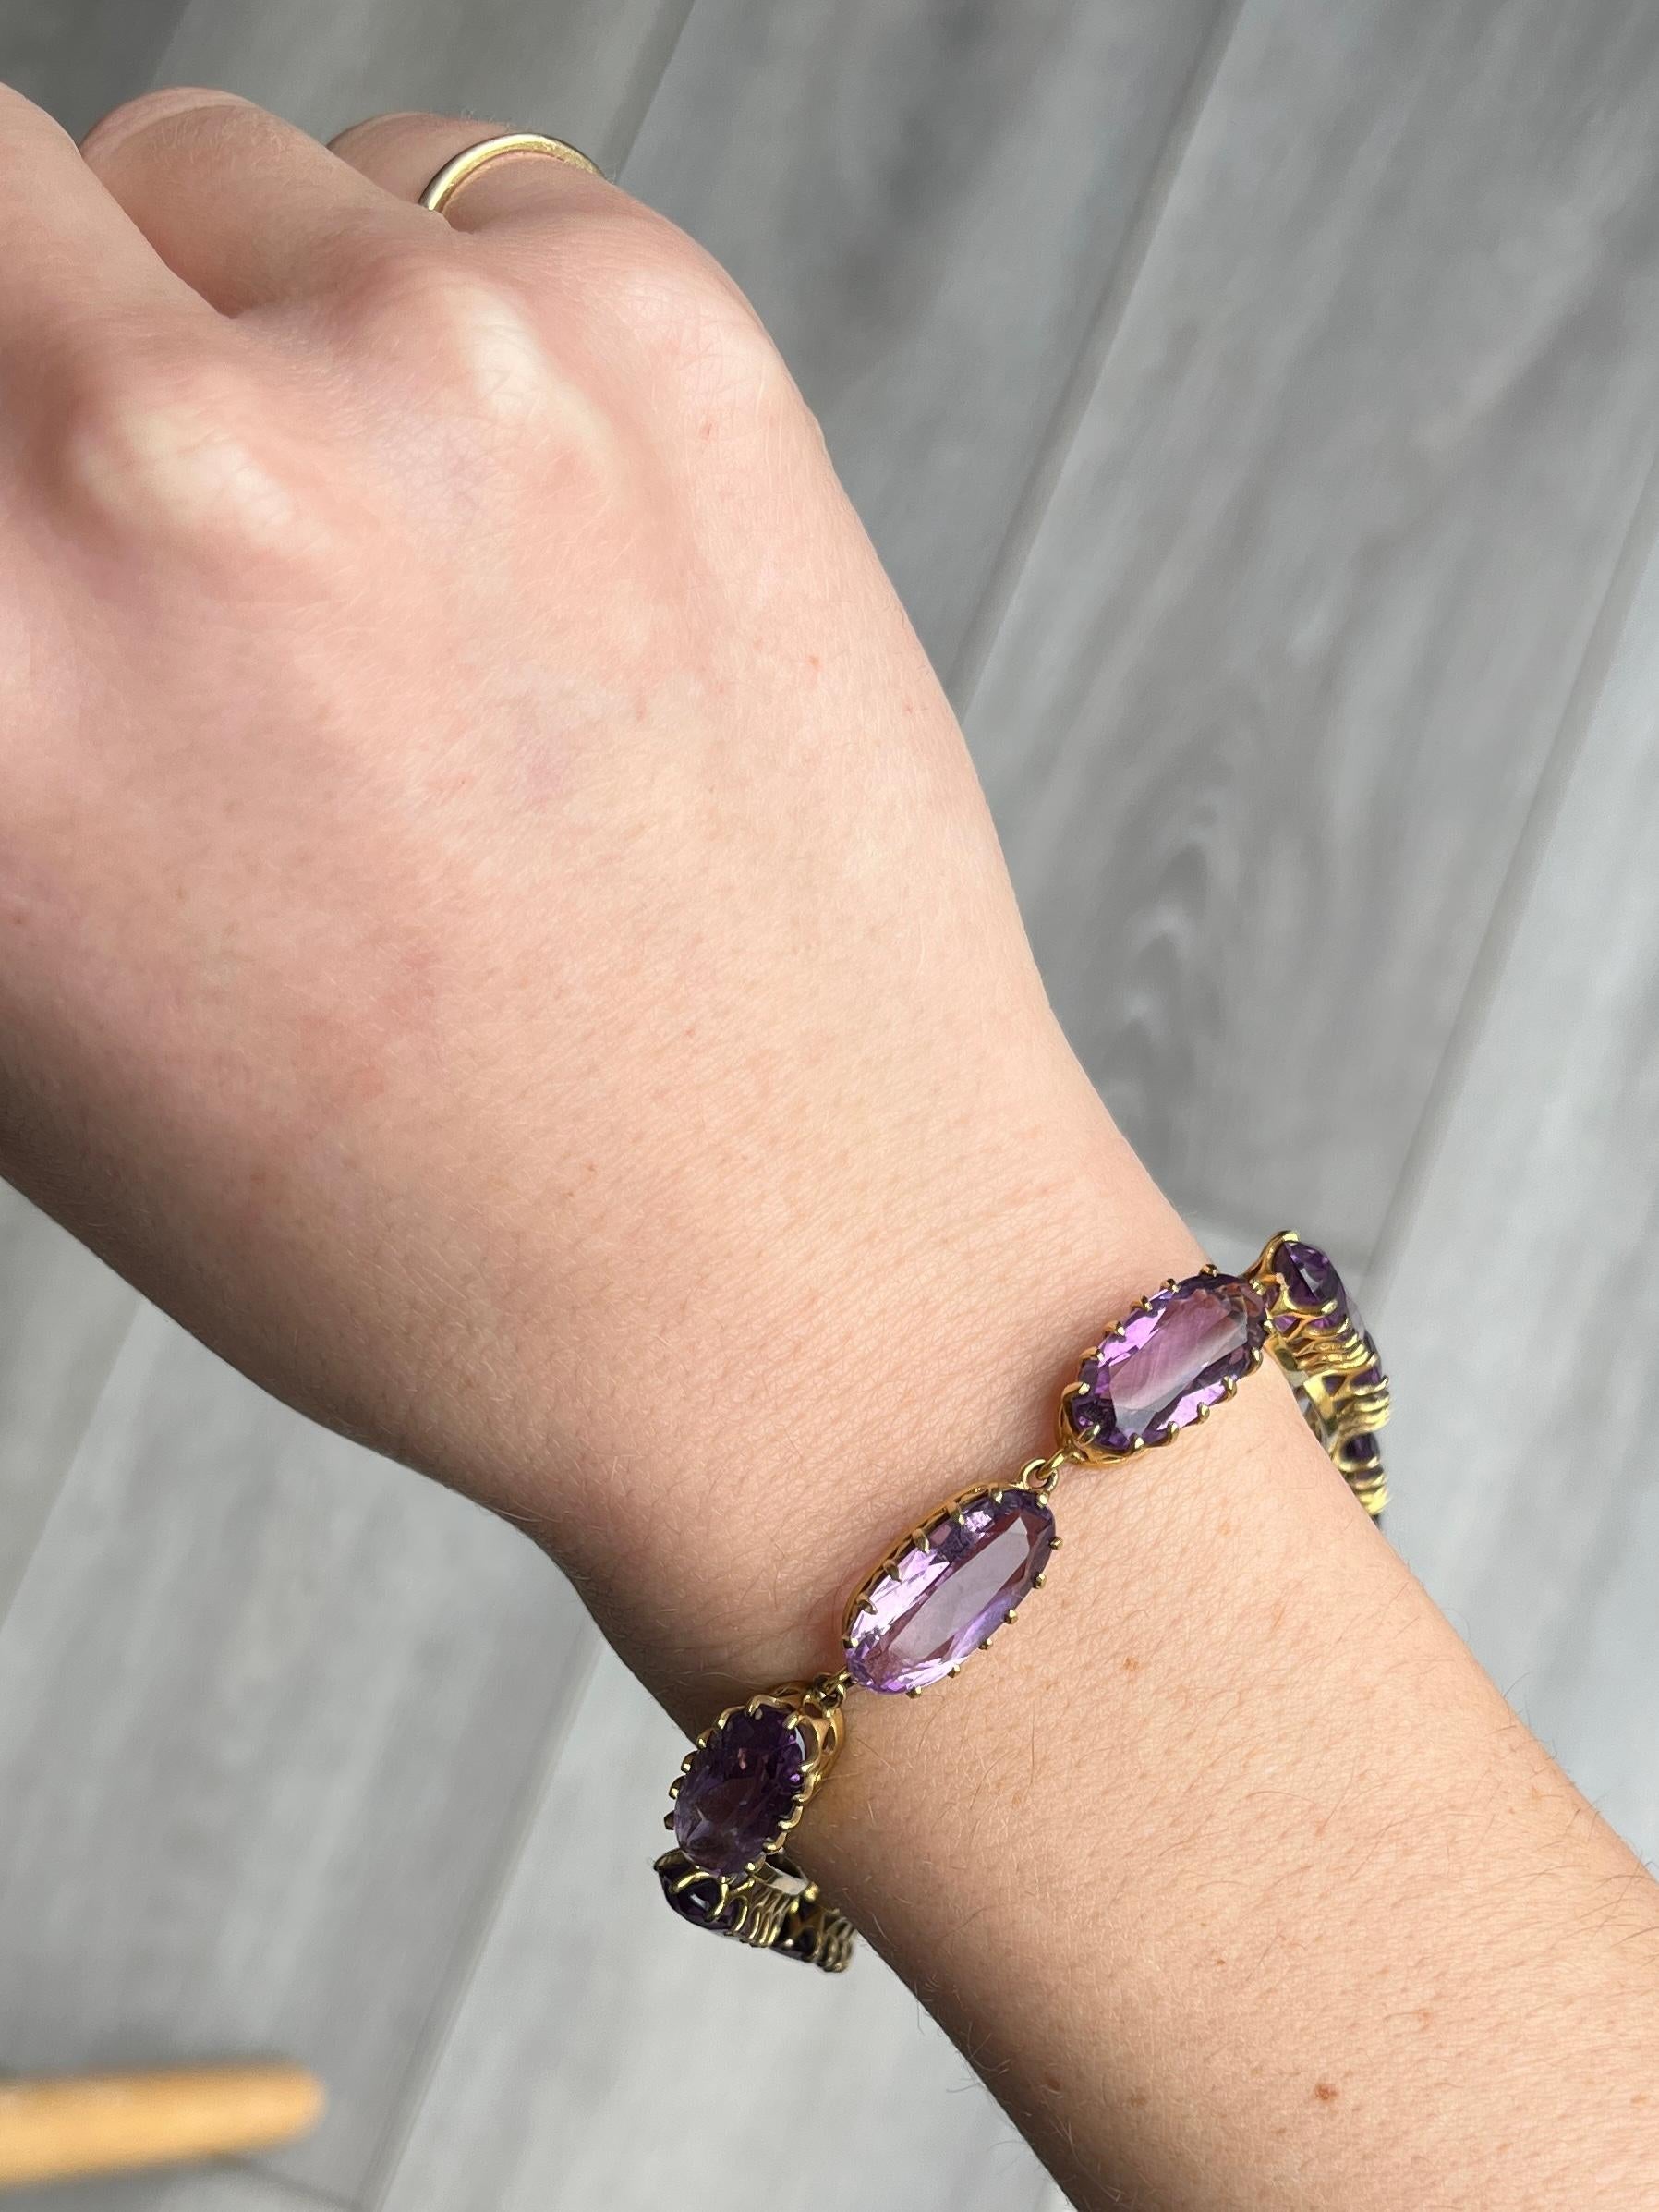 Such a decorative piece! This bracelet is made up of nine amethyst stones. The clasp even has an amethyst stone set on it so it is nearly invisible. Modelled in 9 carat gold. 

Length: 18.5cm
Stone Dimensions: 9x17mm

Weight: 18.9g